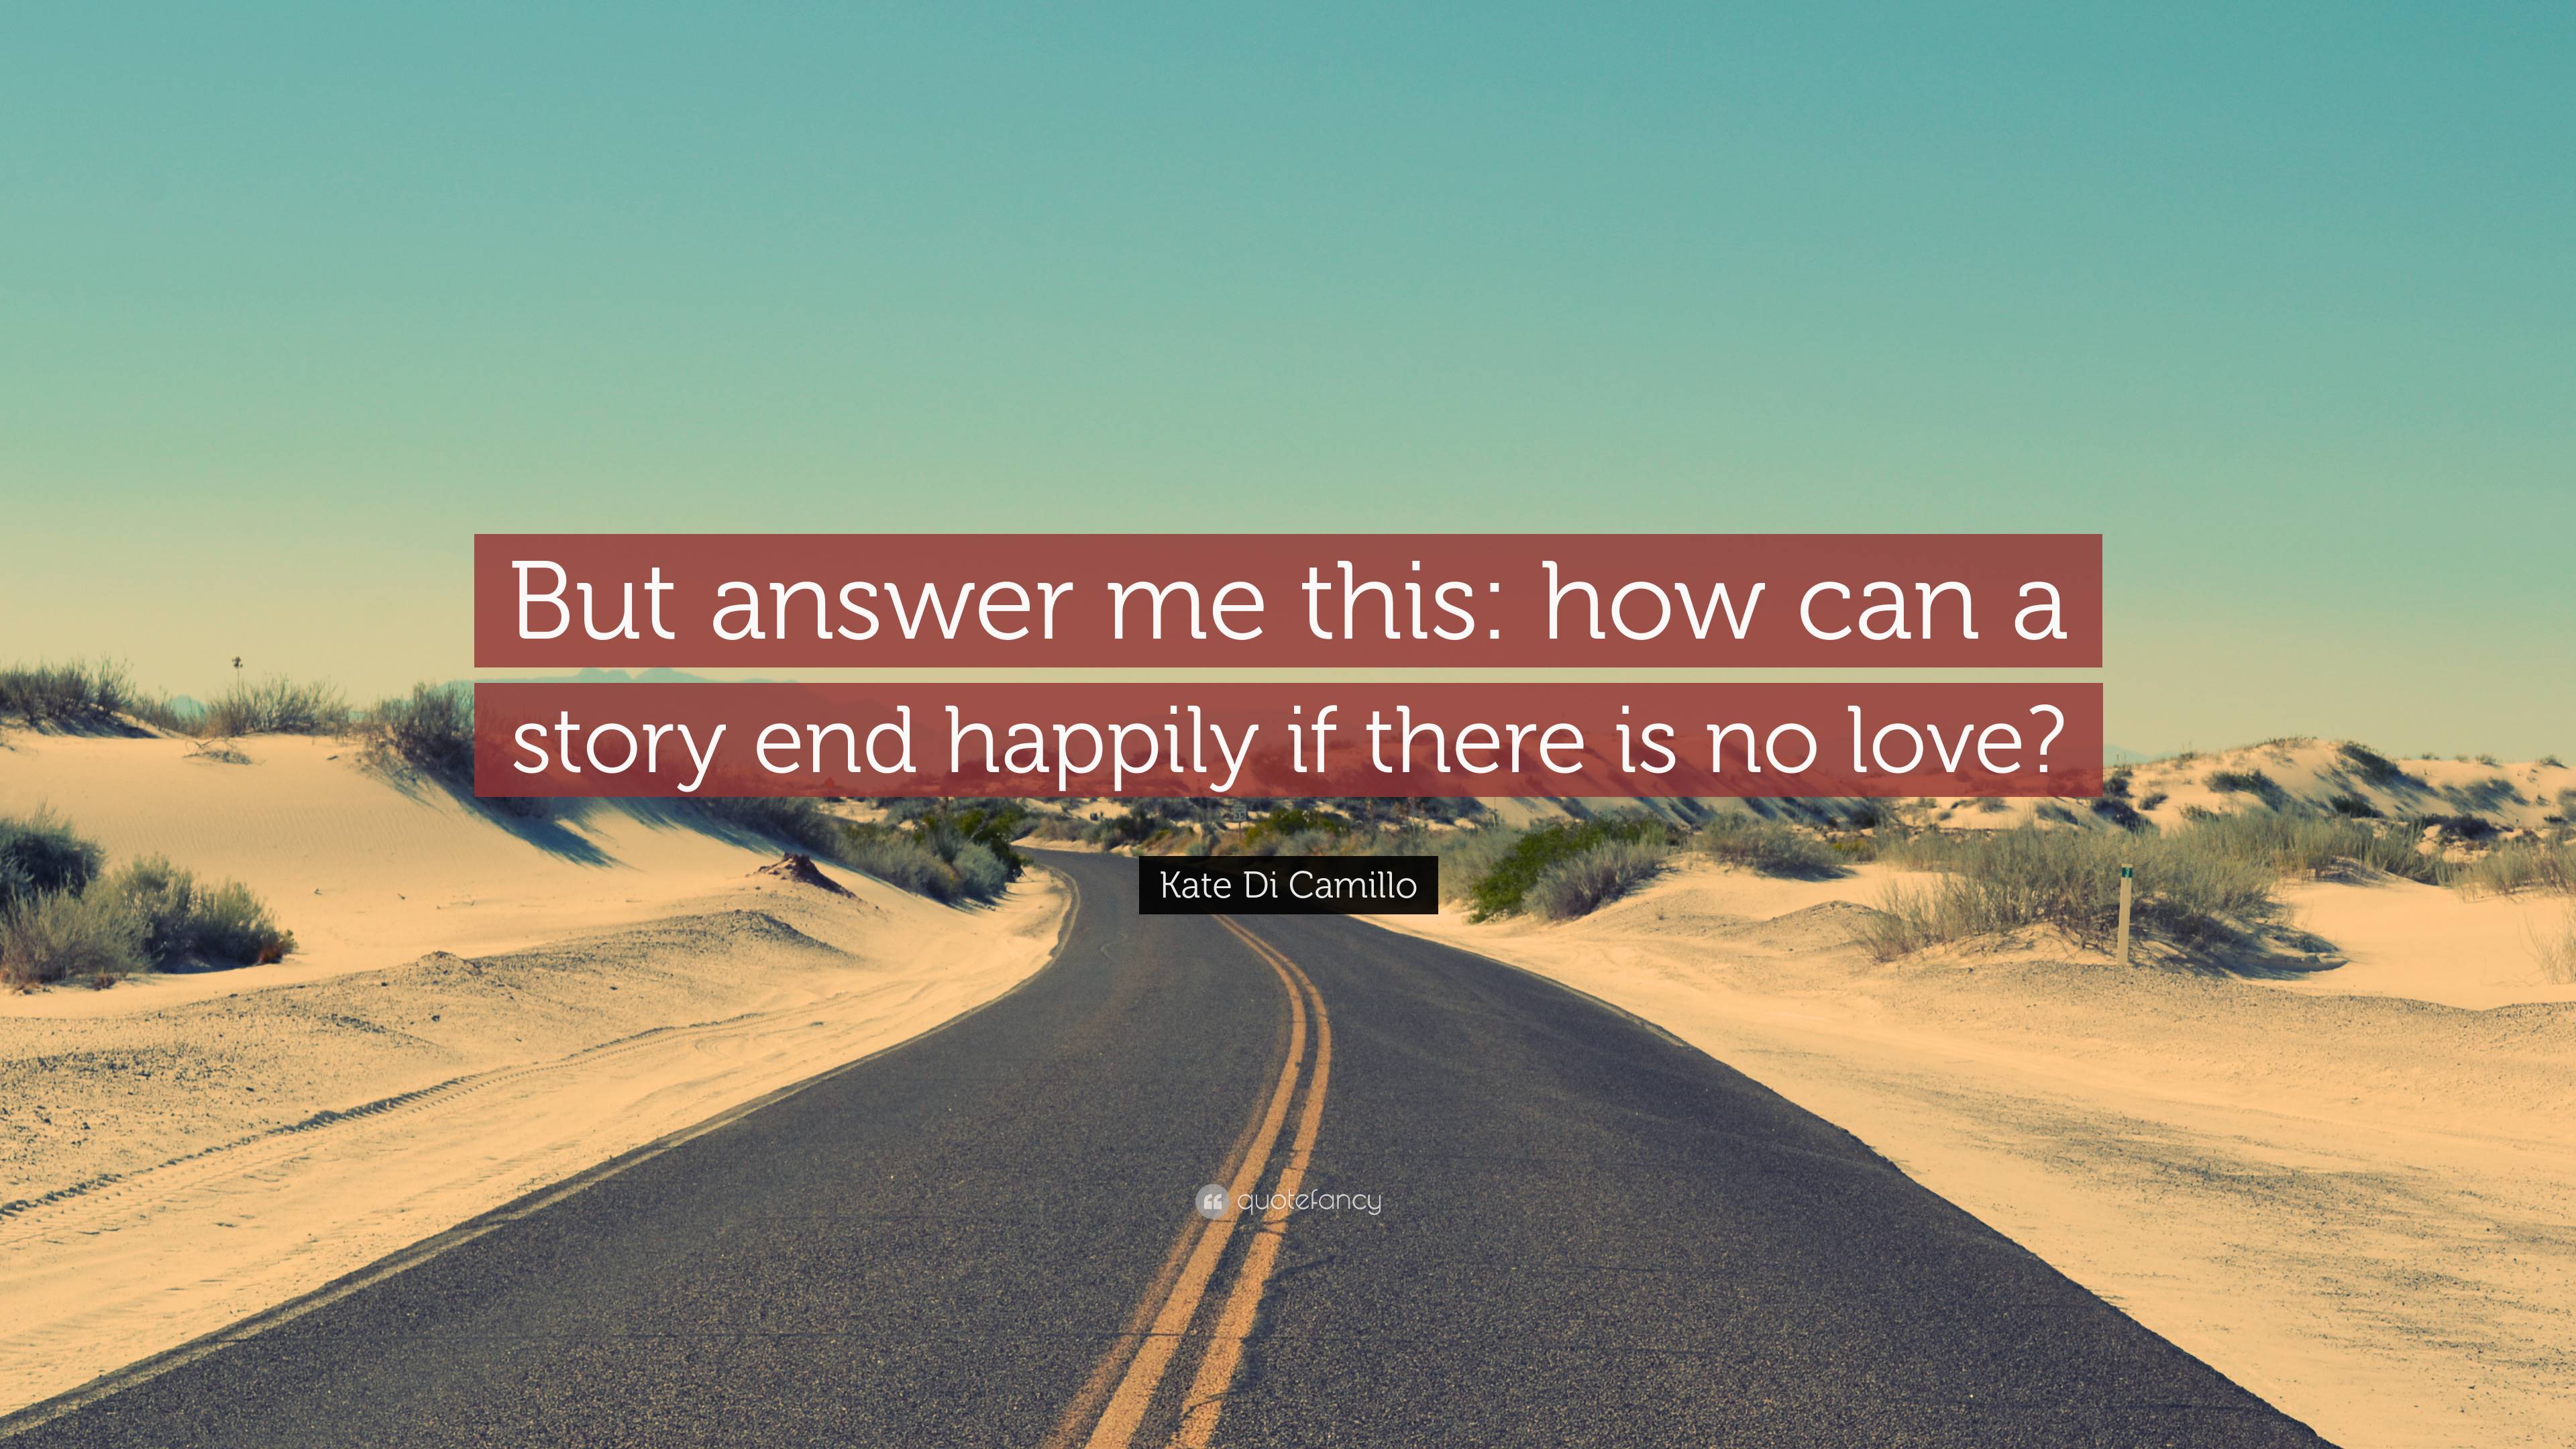 Kate Di Camillo Quote: “But answer me this: how can a story end happily ...